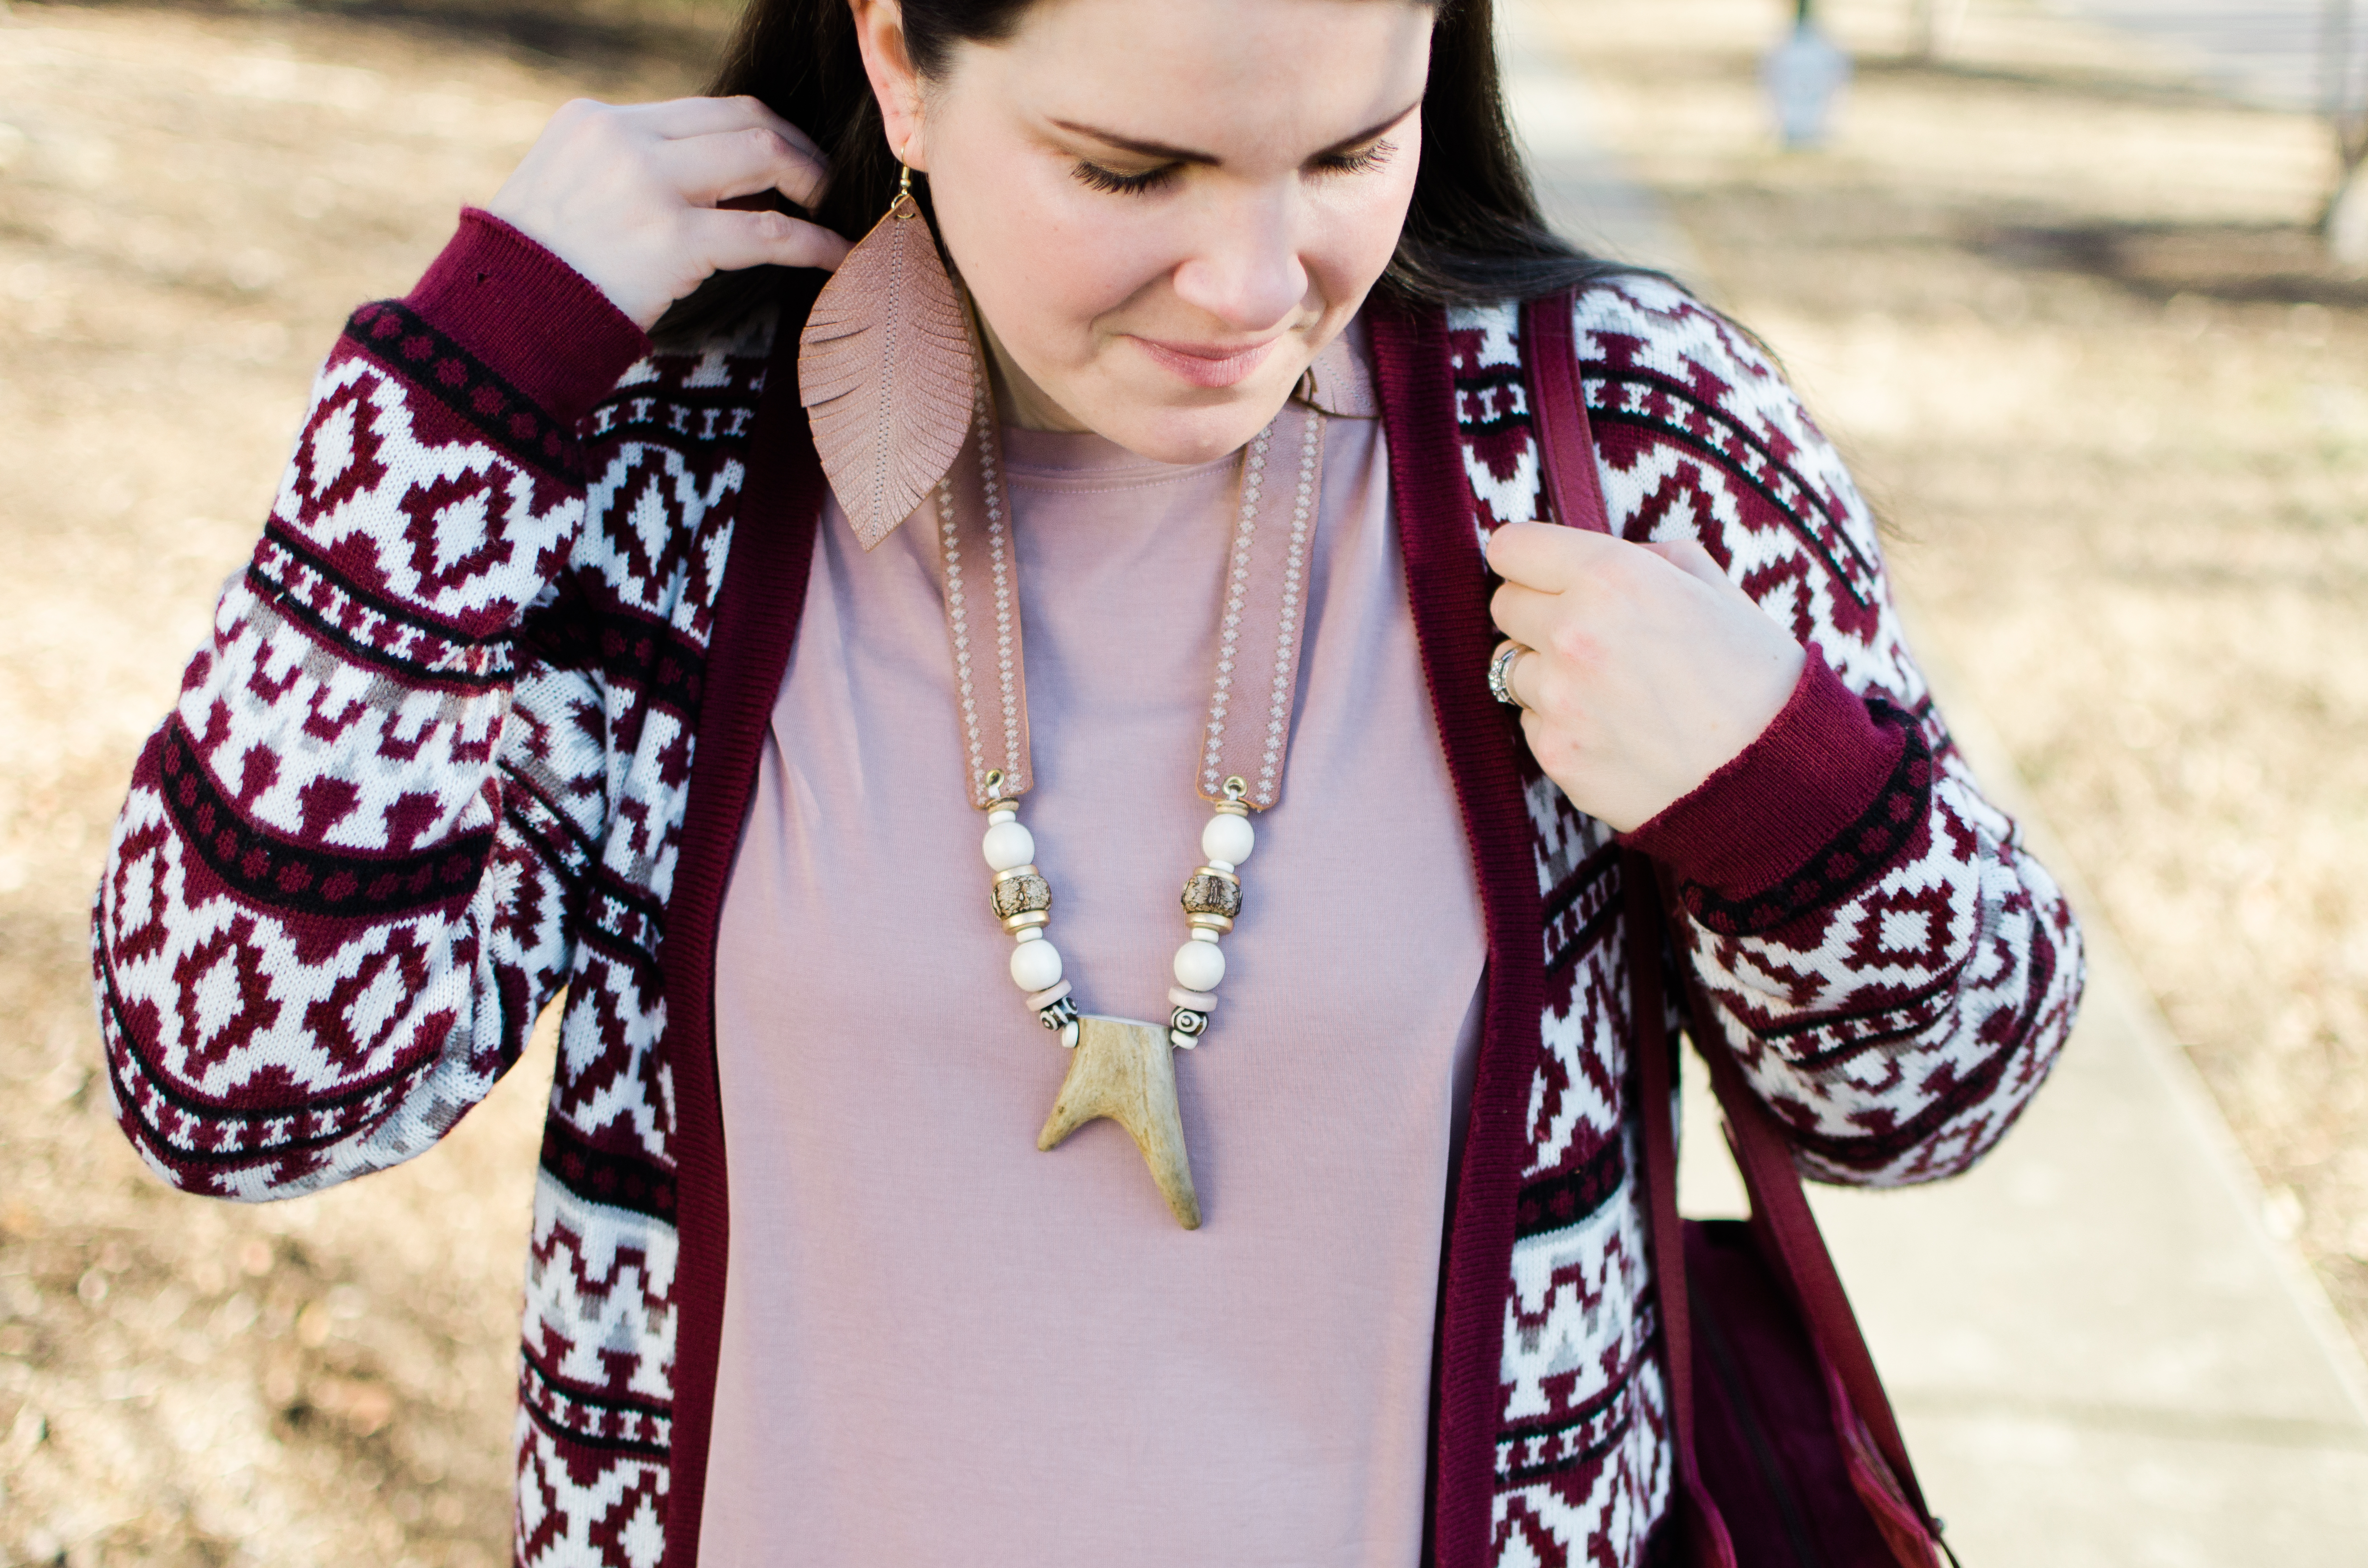 Designed for Joy, October Jaipur, The Root Collective, ethical fashion blogger, ethical style blogger (9) - Fashion for Good Friday by popular North Carolina fashion blogger Still Being Molly